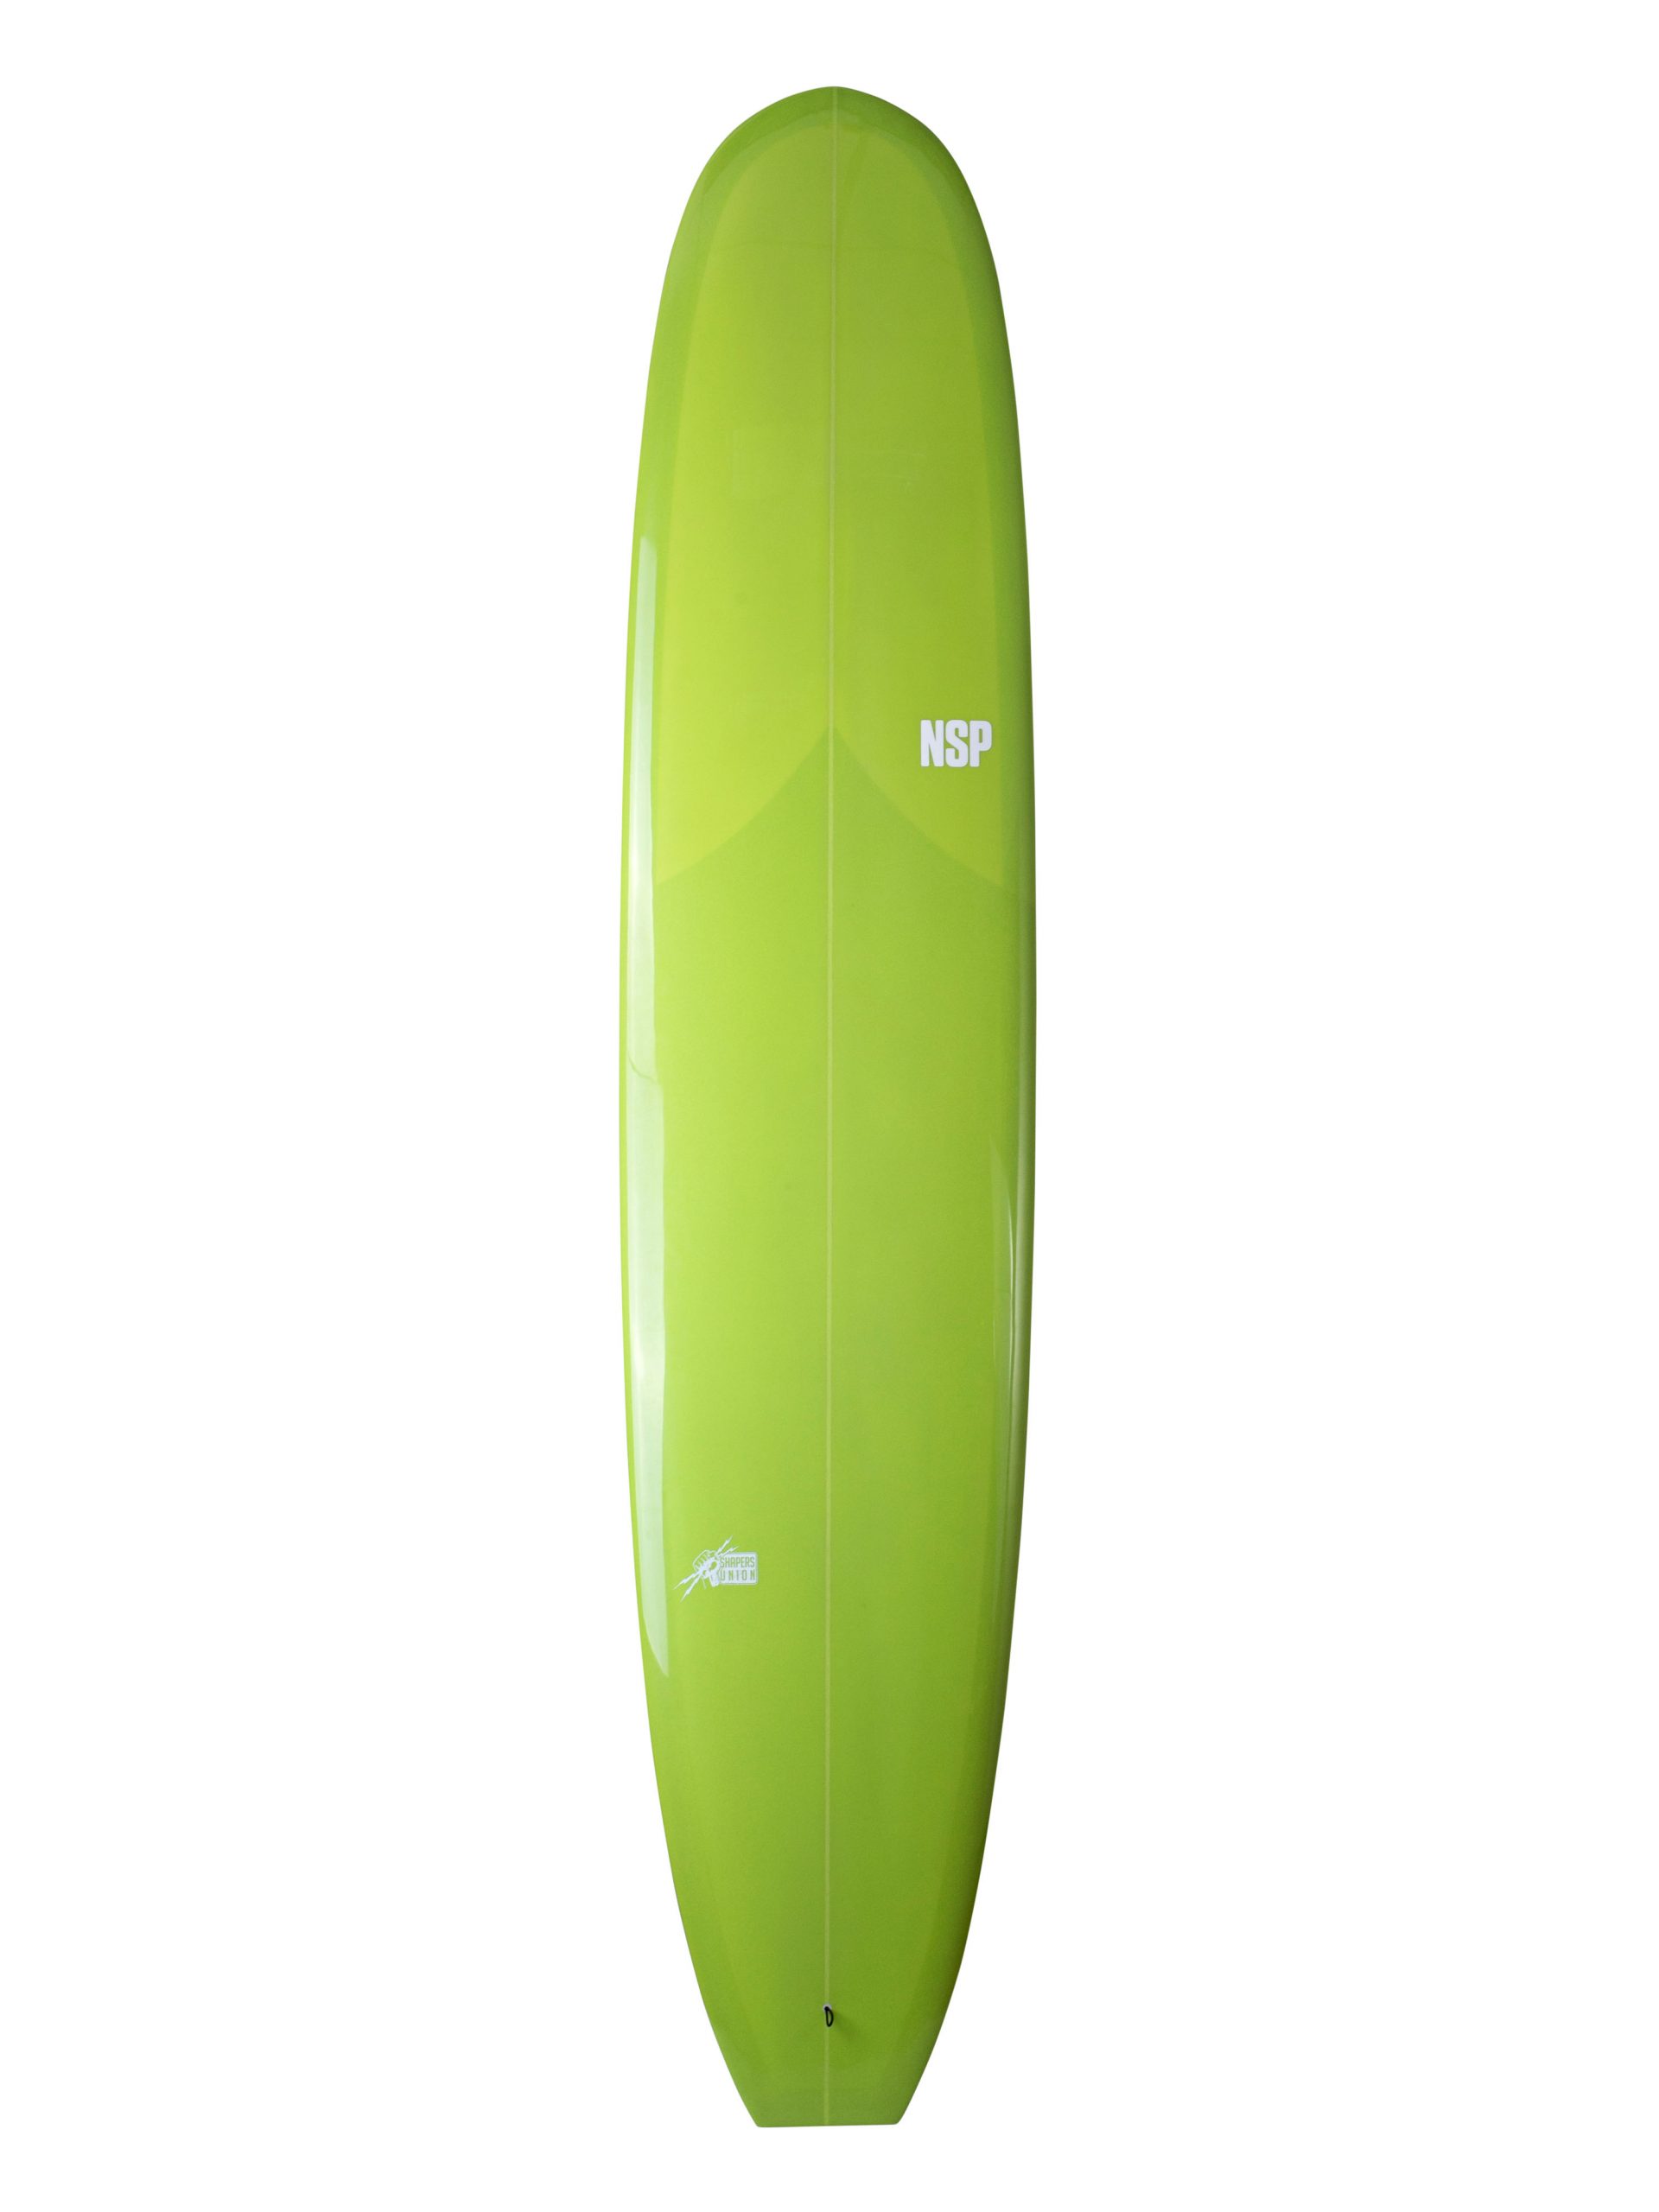 NSP SS21 Surfboards